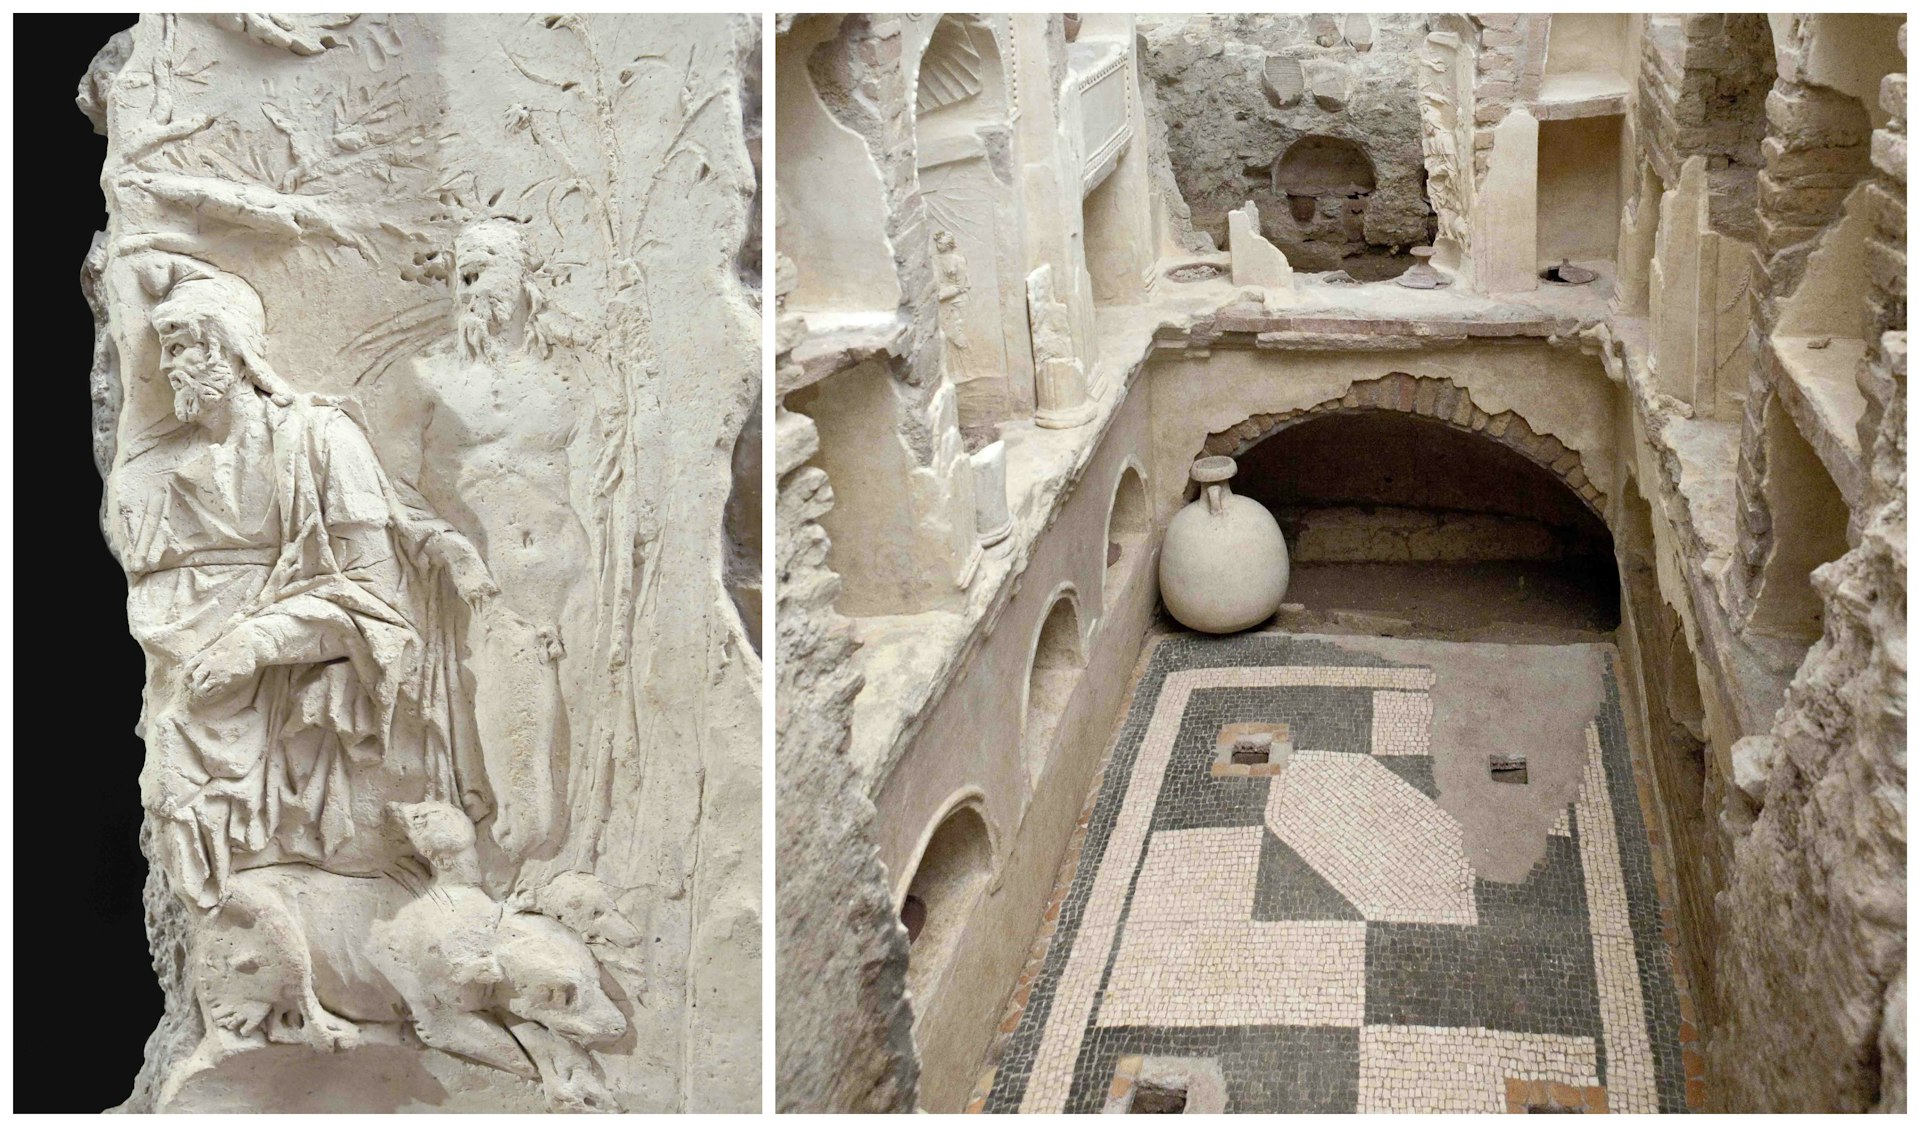 Aerial and up-close shots of marbled burial sites under St Peter's Basilica